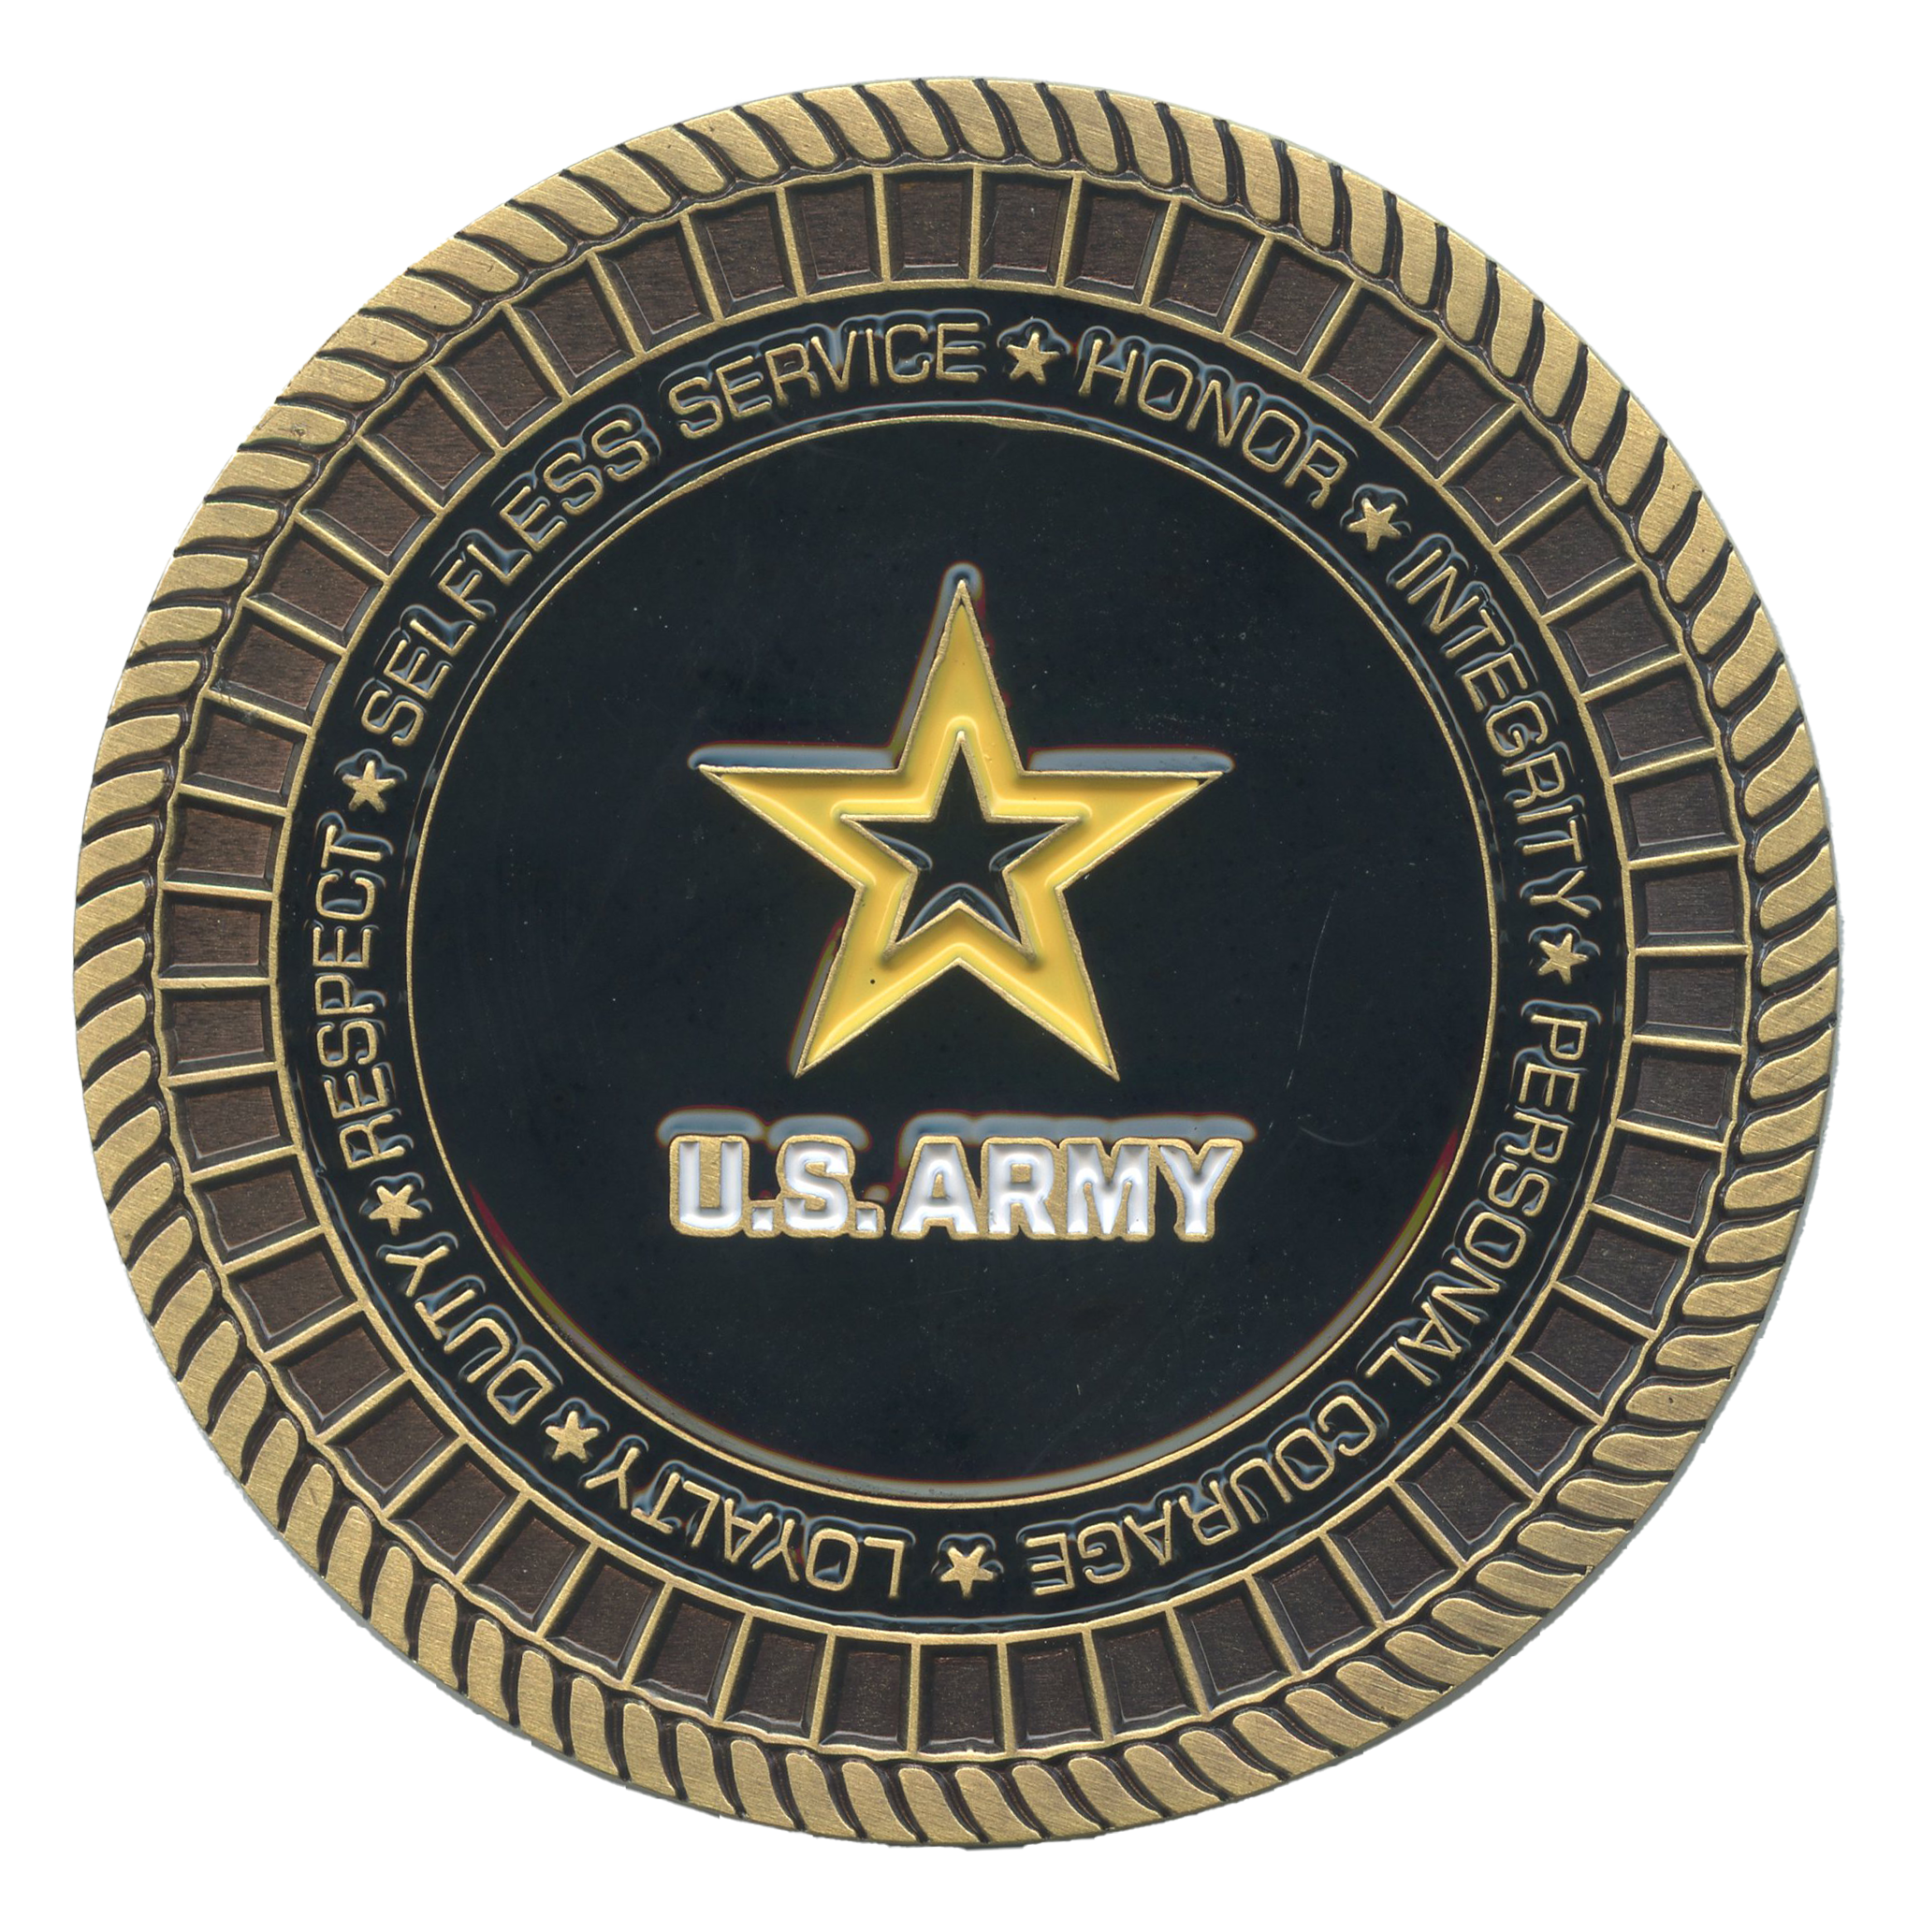 COIN-U.S. ARMY MILITARY POLICE@ (USE ITEM 22529)